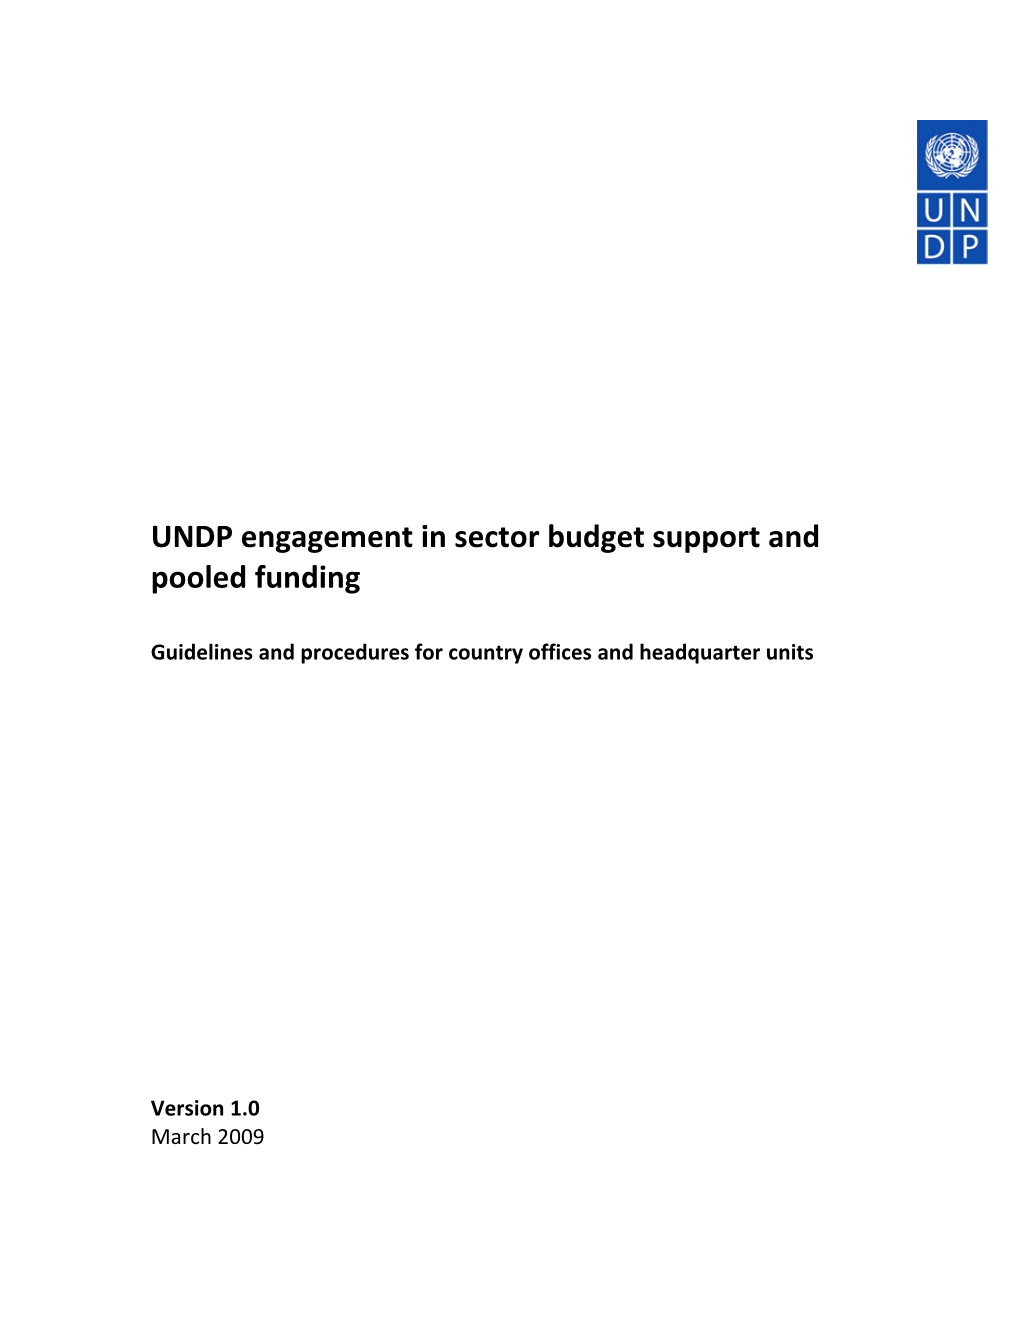 Sector Budget Support and Pooled Funds: Operational Guidelines and Procedures Version 1.0